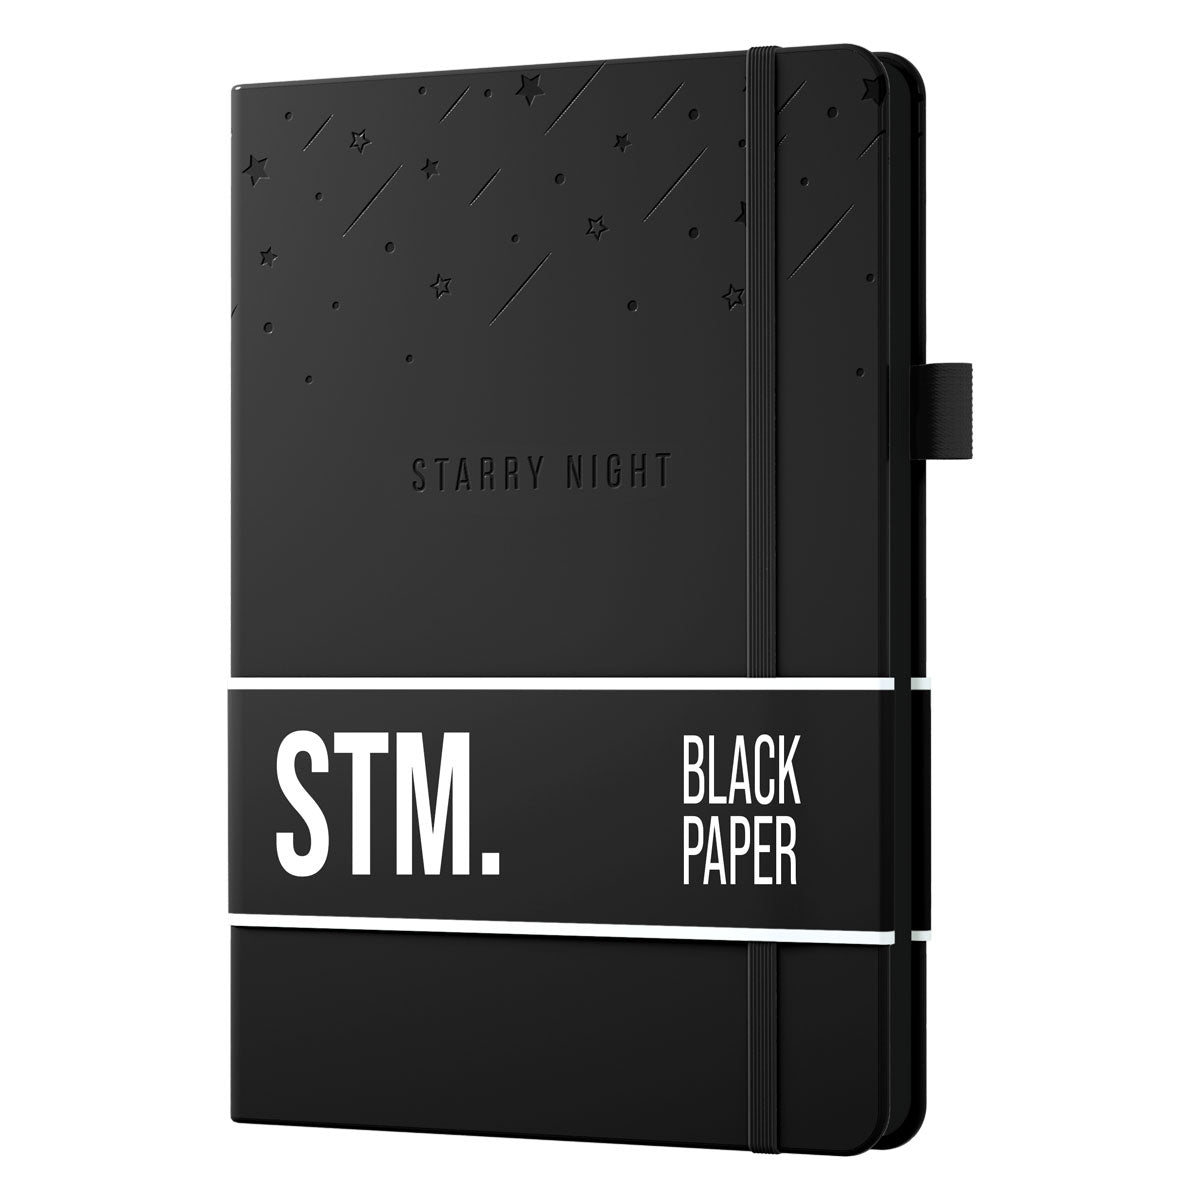 Black Paper Notebook For White Ink by Anachronistic